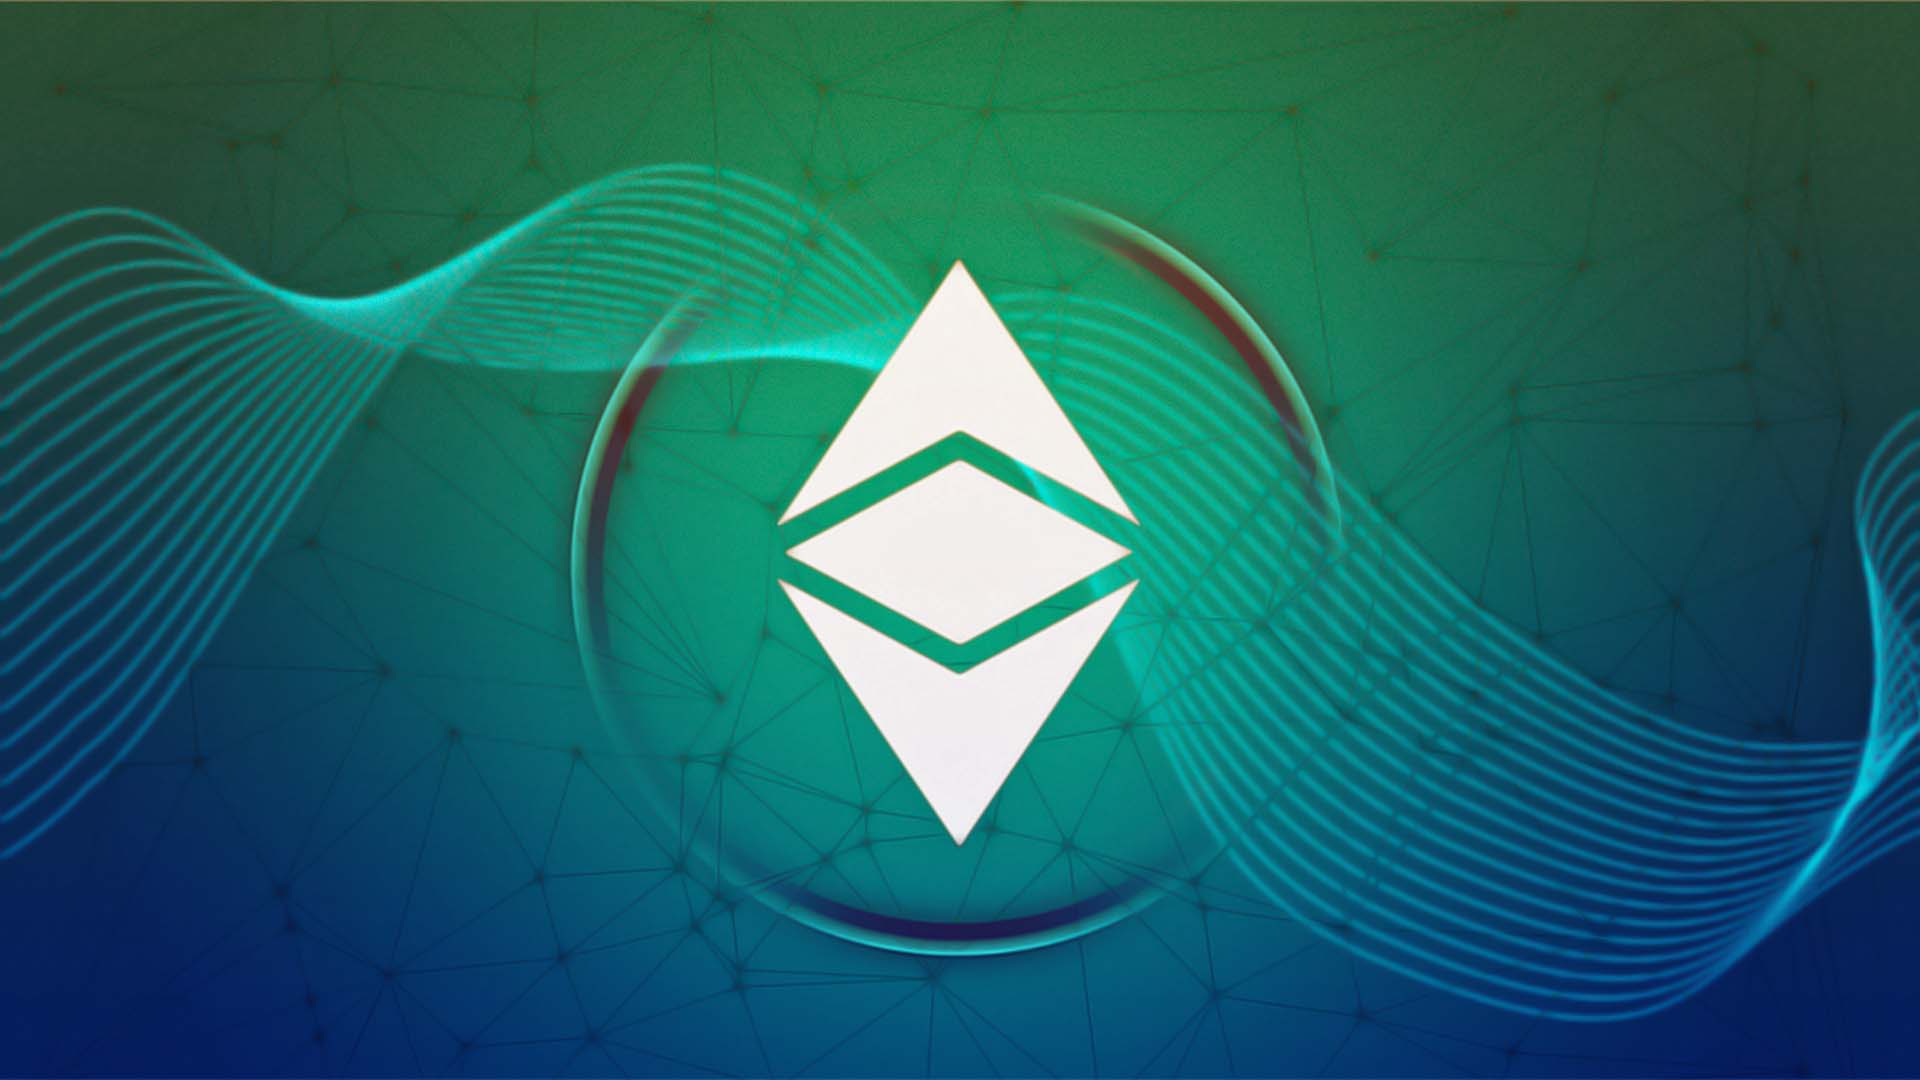 Ethereum Classic Price Prediction: ETC Breaks The Consolidation, Will It Continue The Upside?